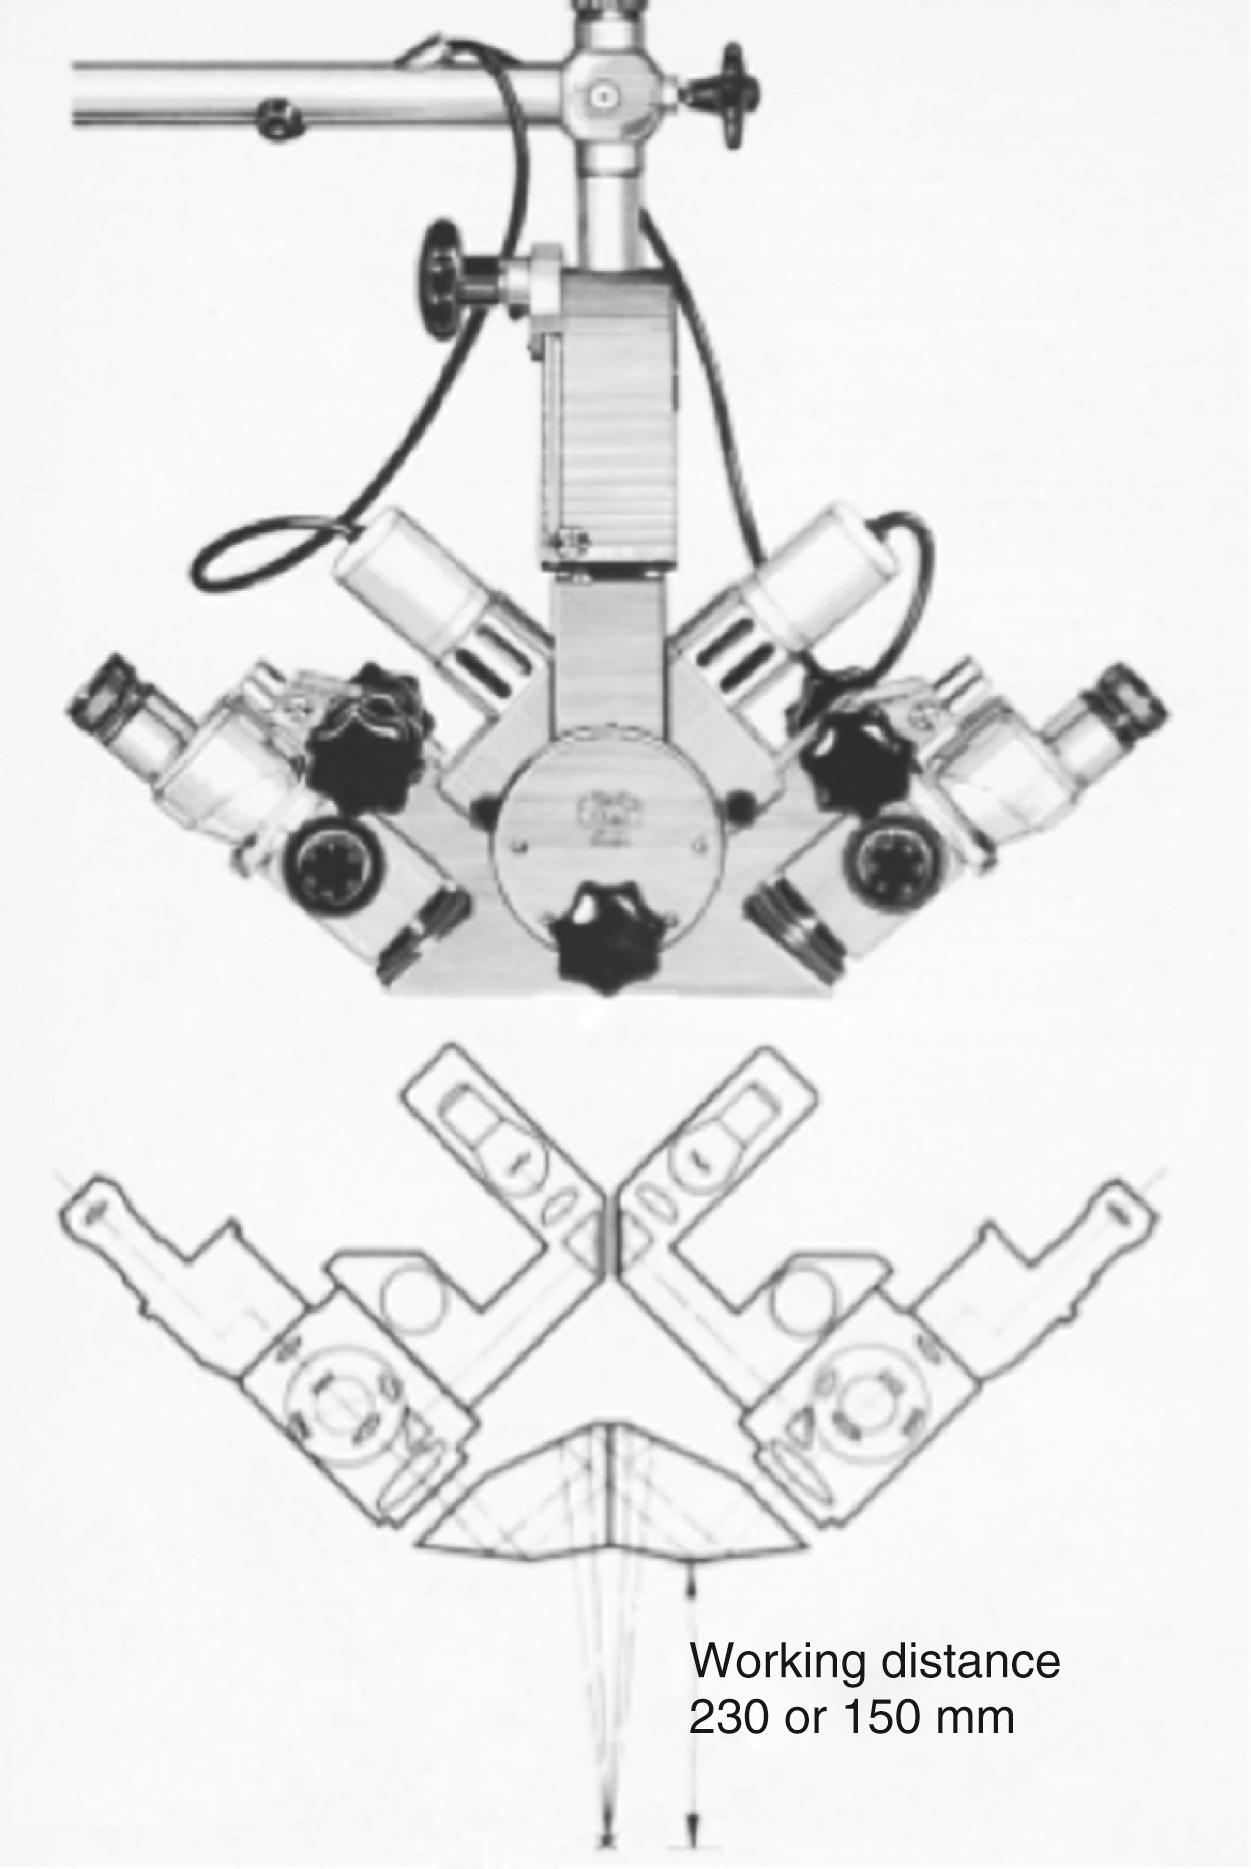 Figure 31.4, Zeiss diploscope first offered in 1961.